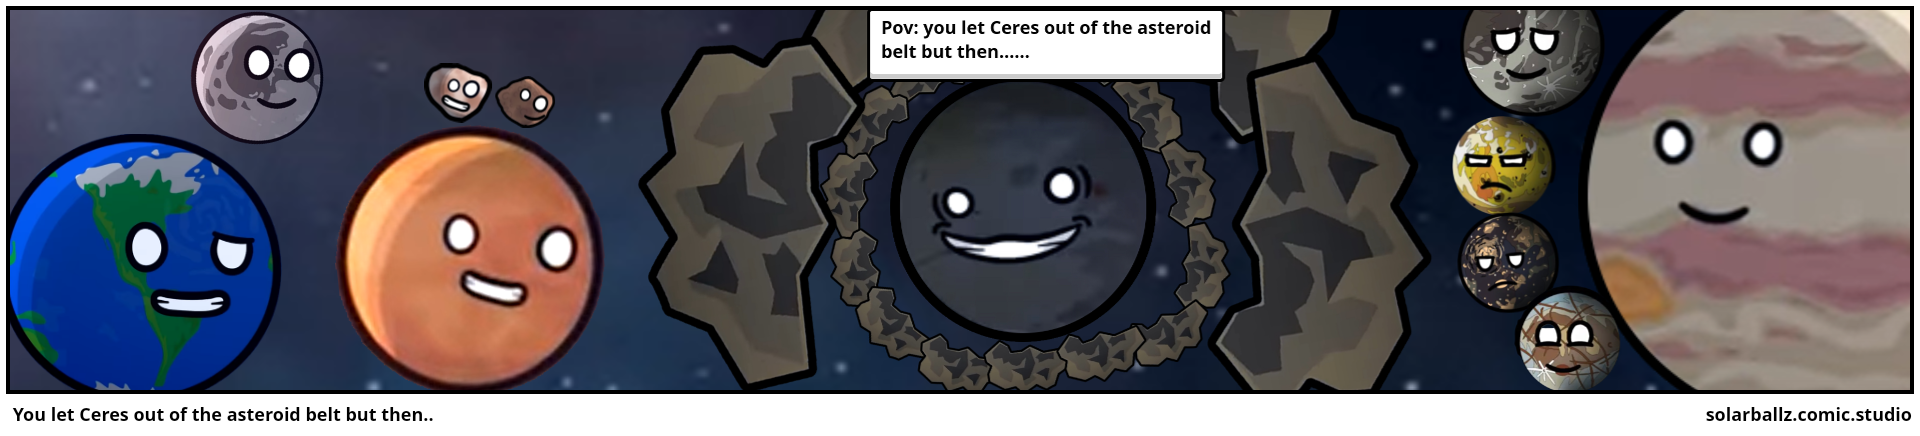  You let Ceres out of the asteroid belt but then..